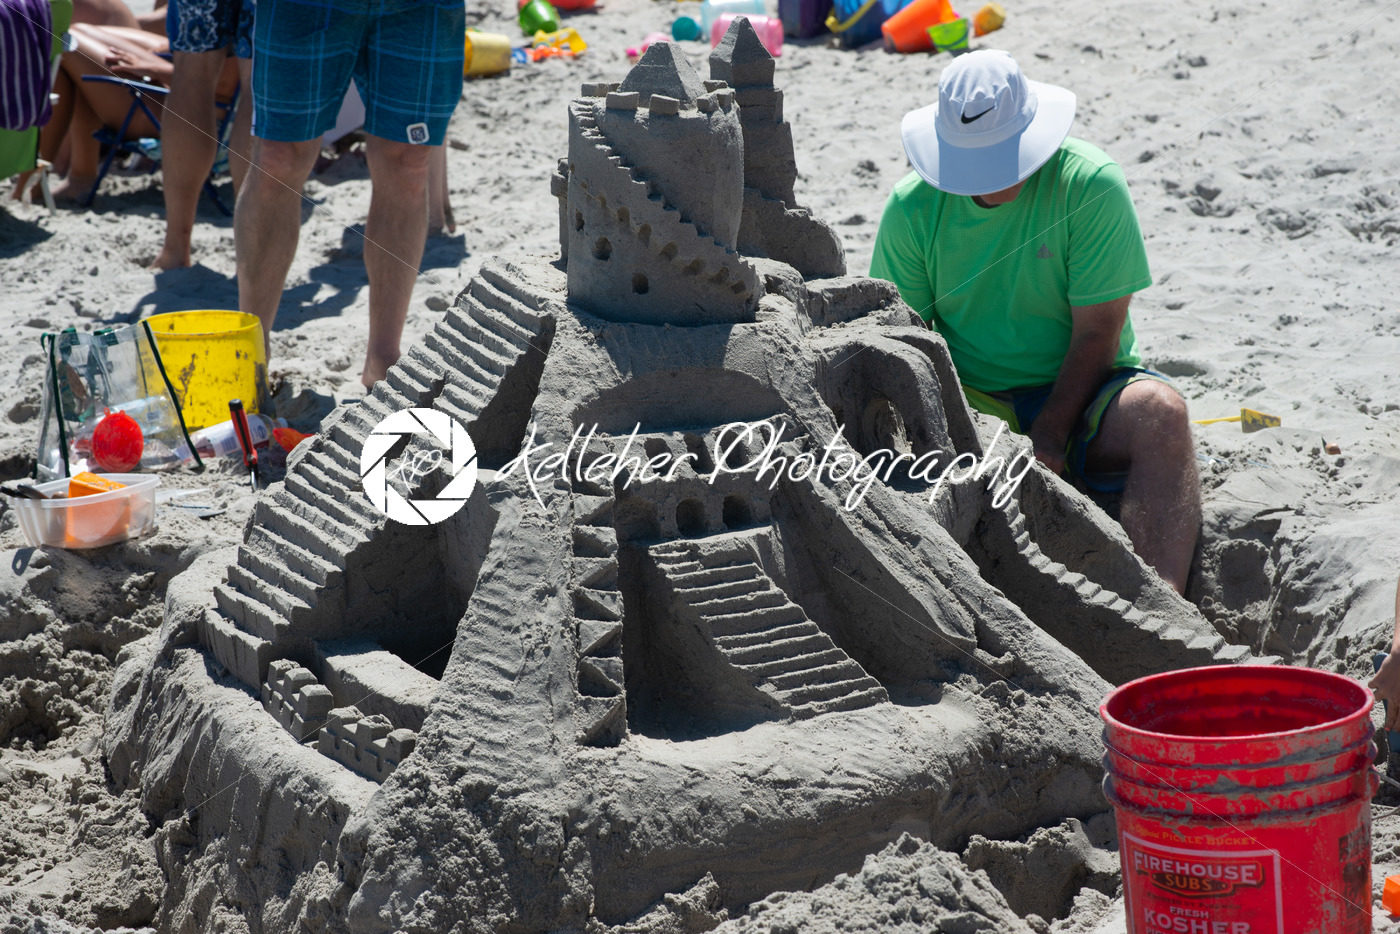 Ocean City, NJ – June 8, 2018: A lavish and large sand castle being built on the beach - Kelleher Photography Store